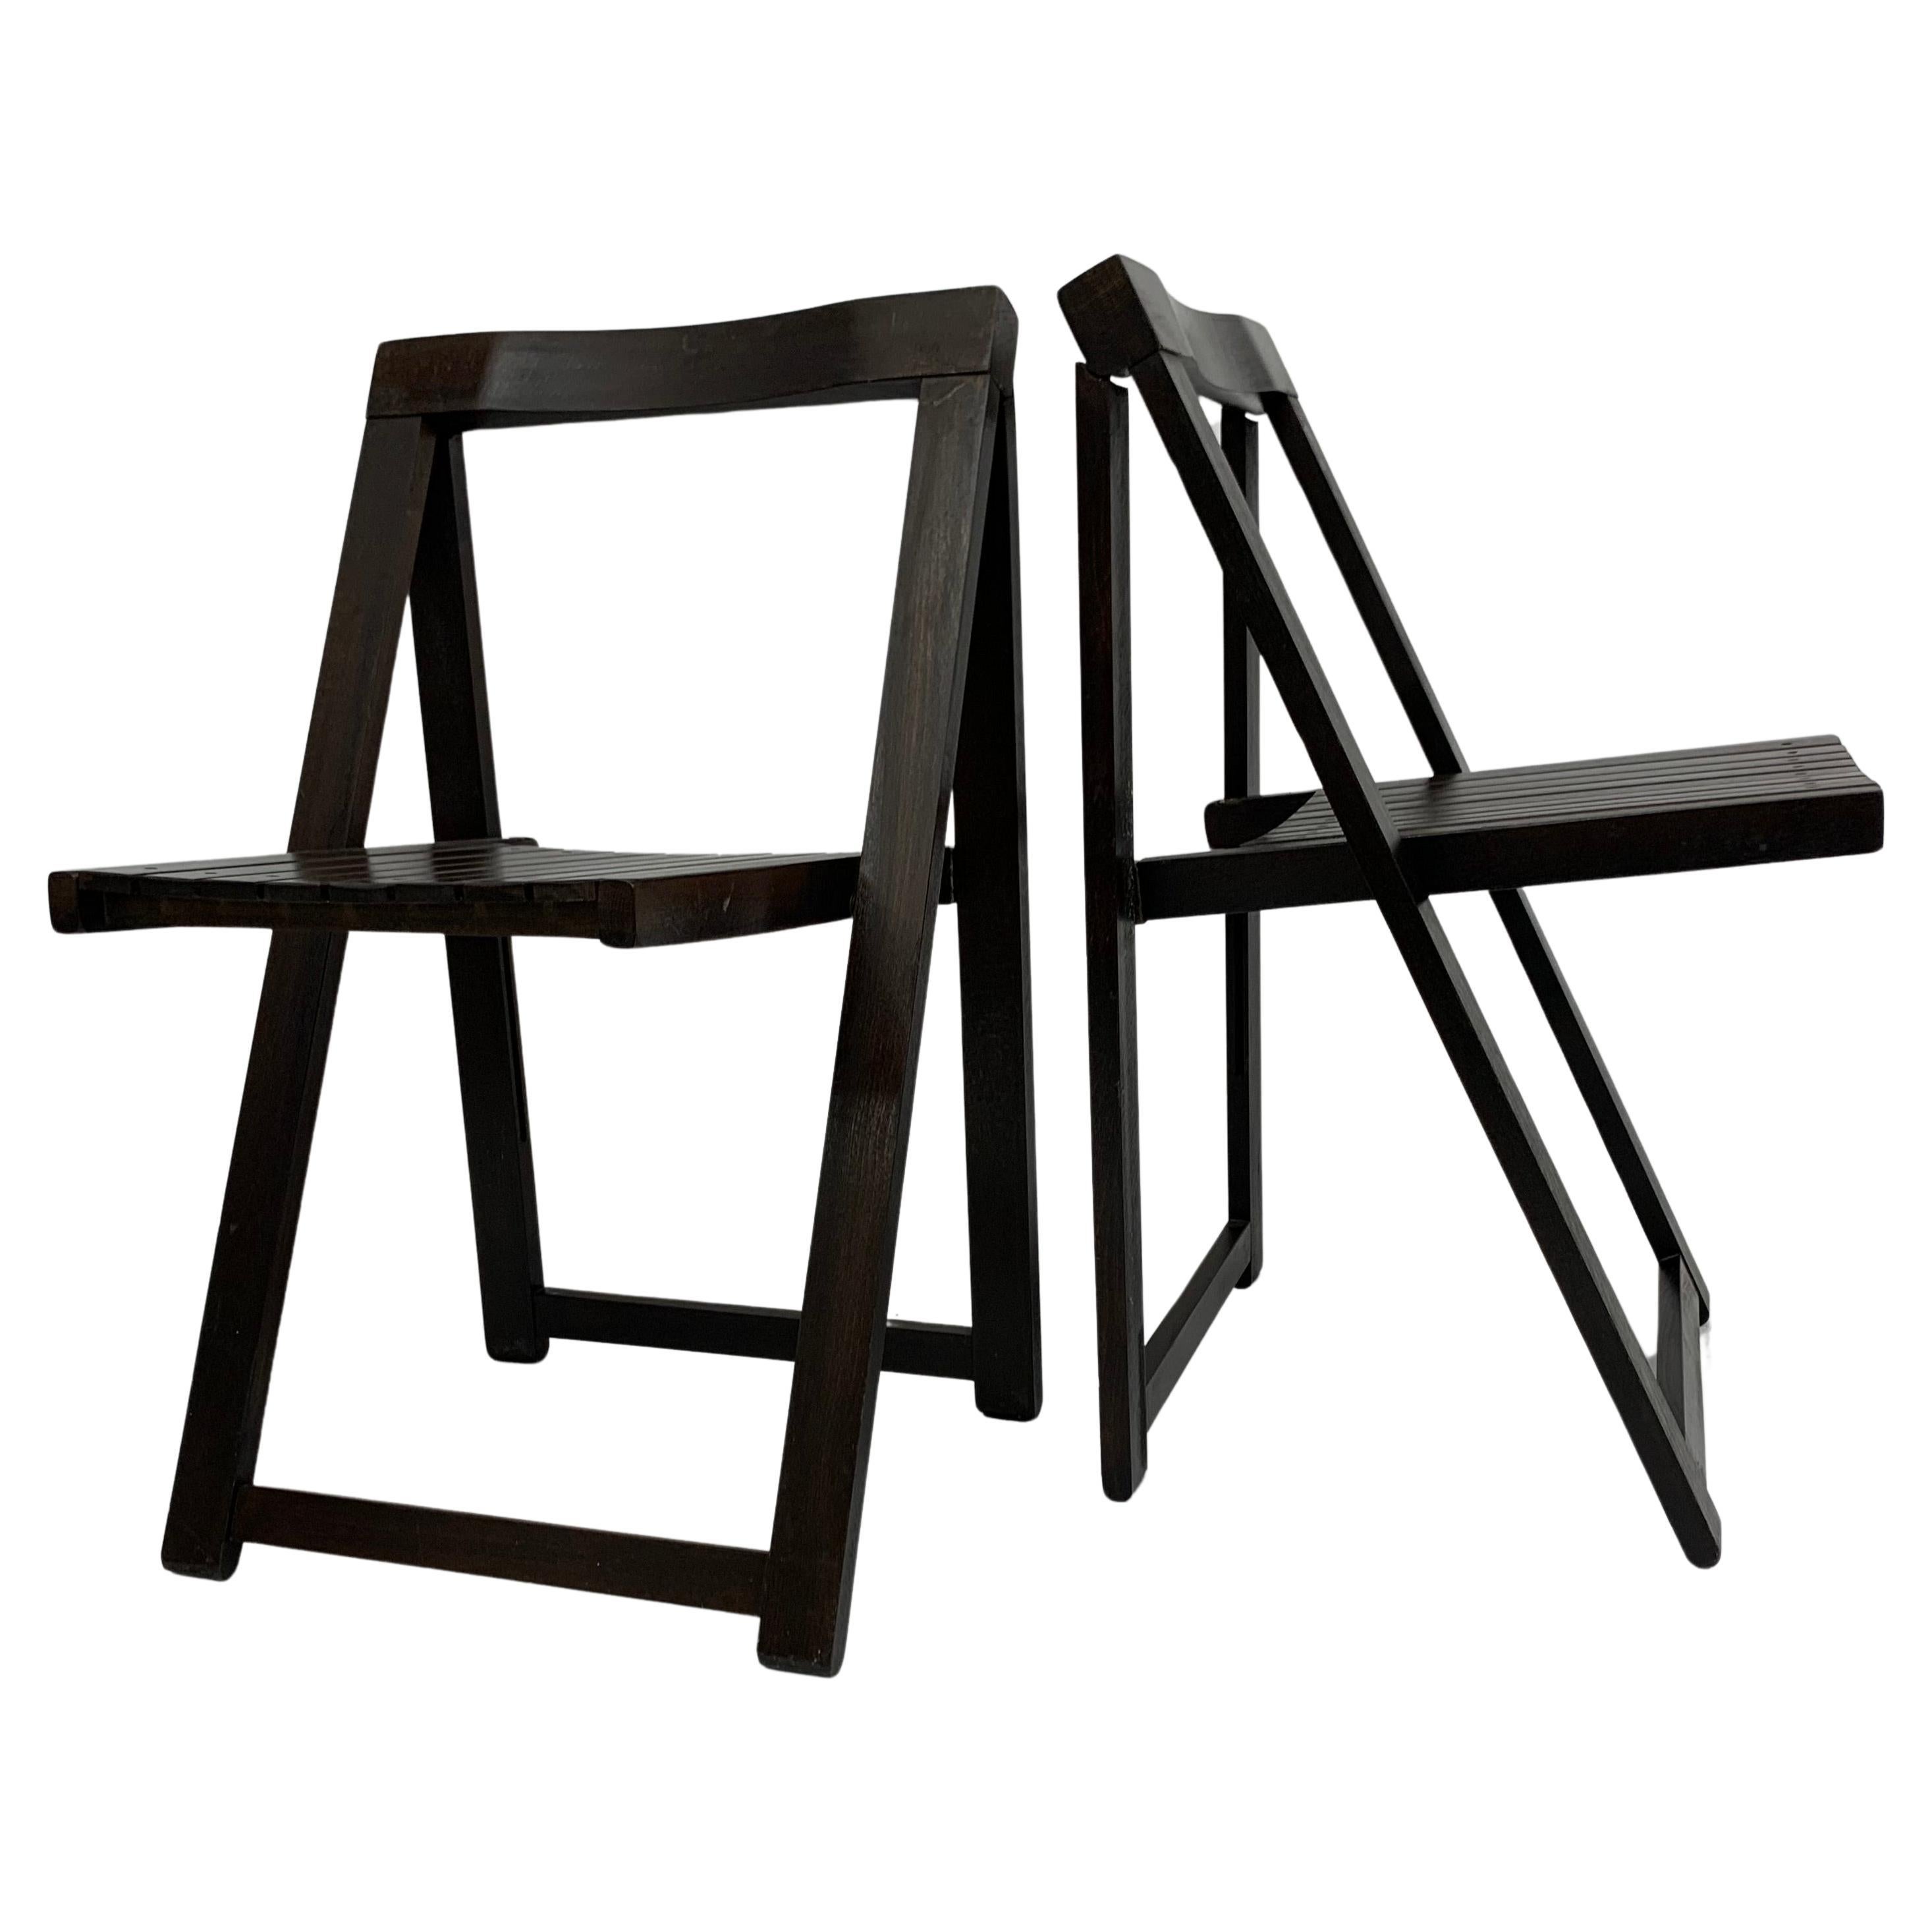 Set of 2 Aldo Jacober for Alberto Bazzani wooden folding chairs, 1960’s For Sale